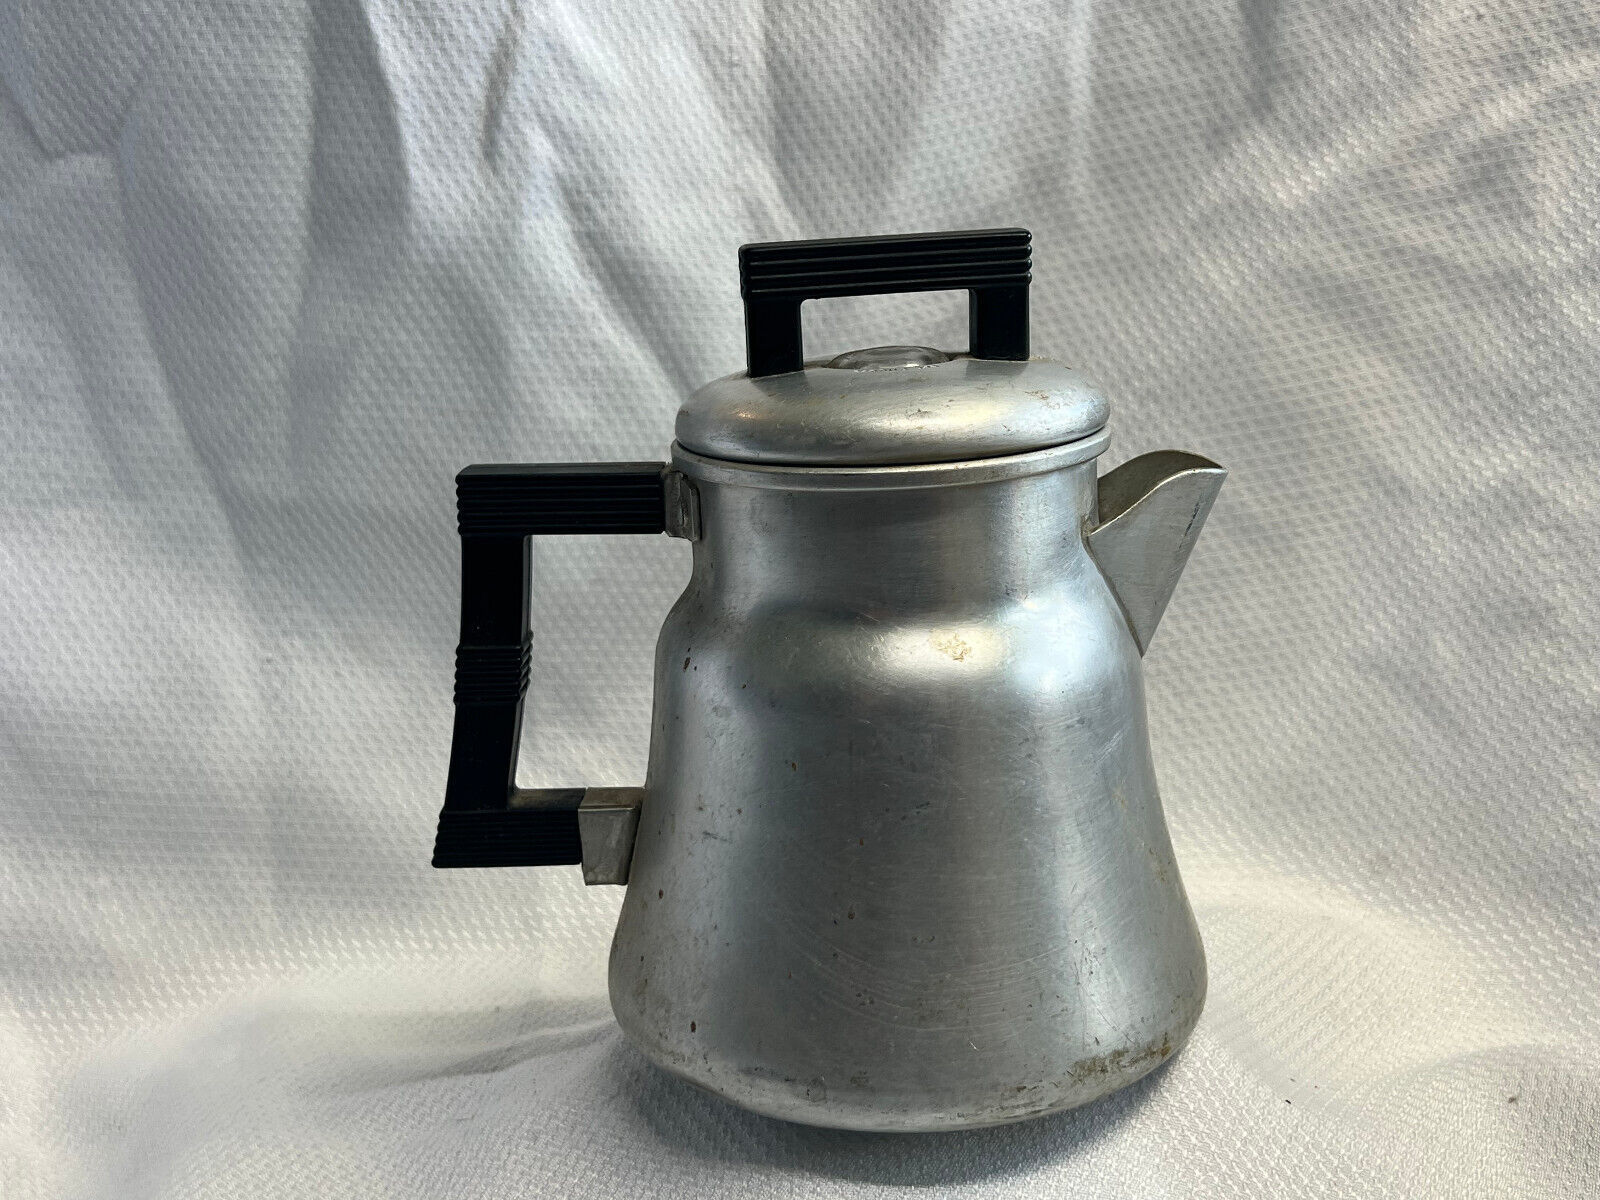 Vtg Wear- Ever Aluminum No 3004 4 Cup Coffee Percolator Made IN USA Sight Glass - $124.95